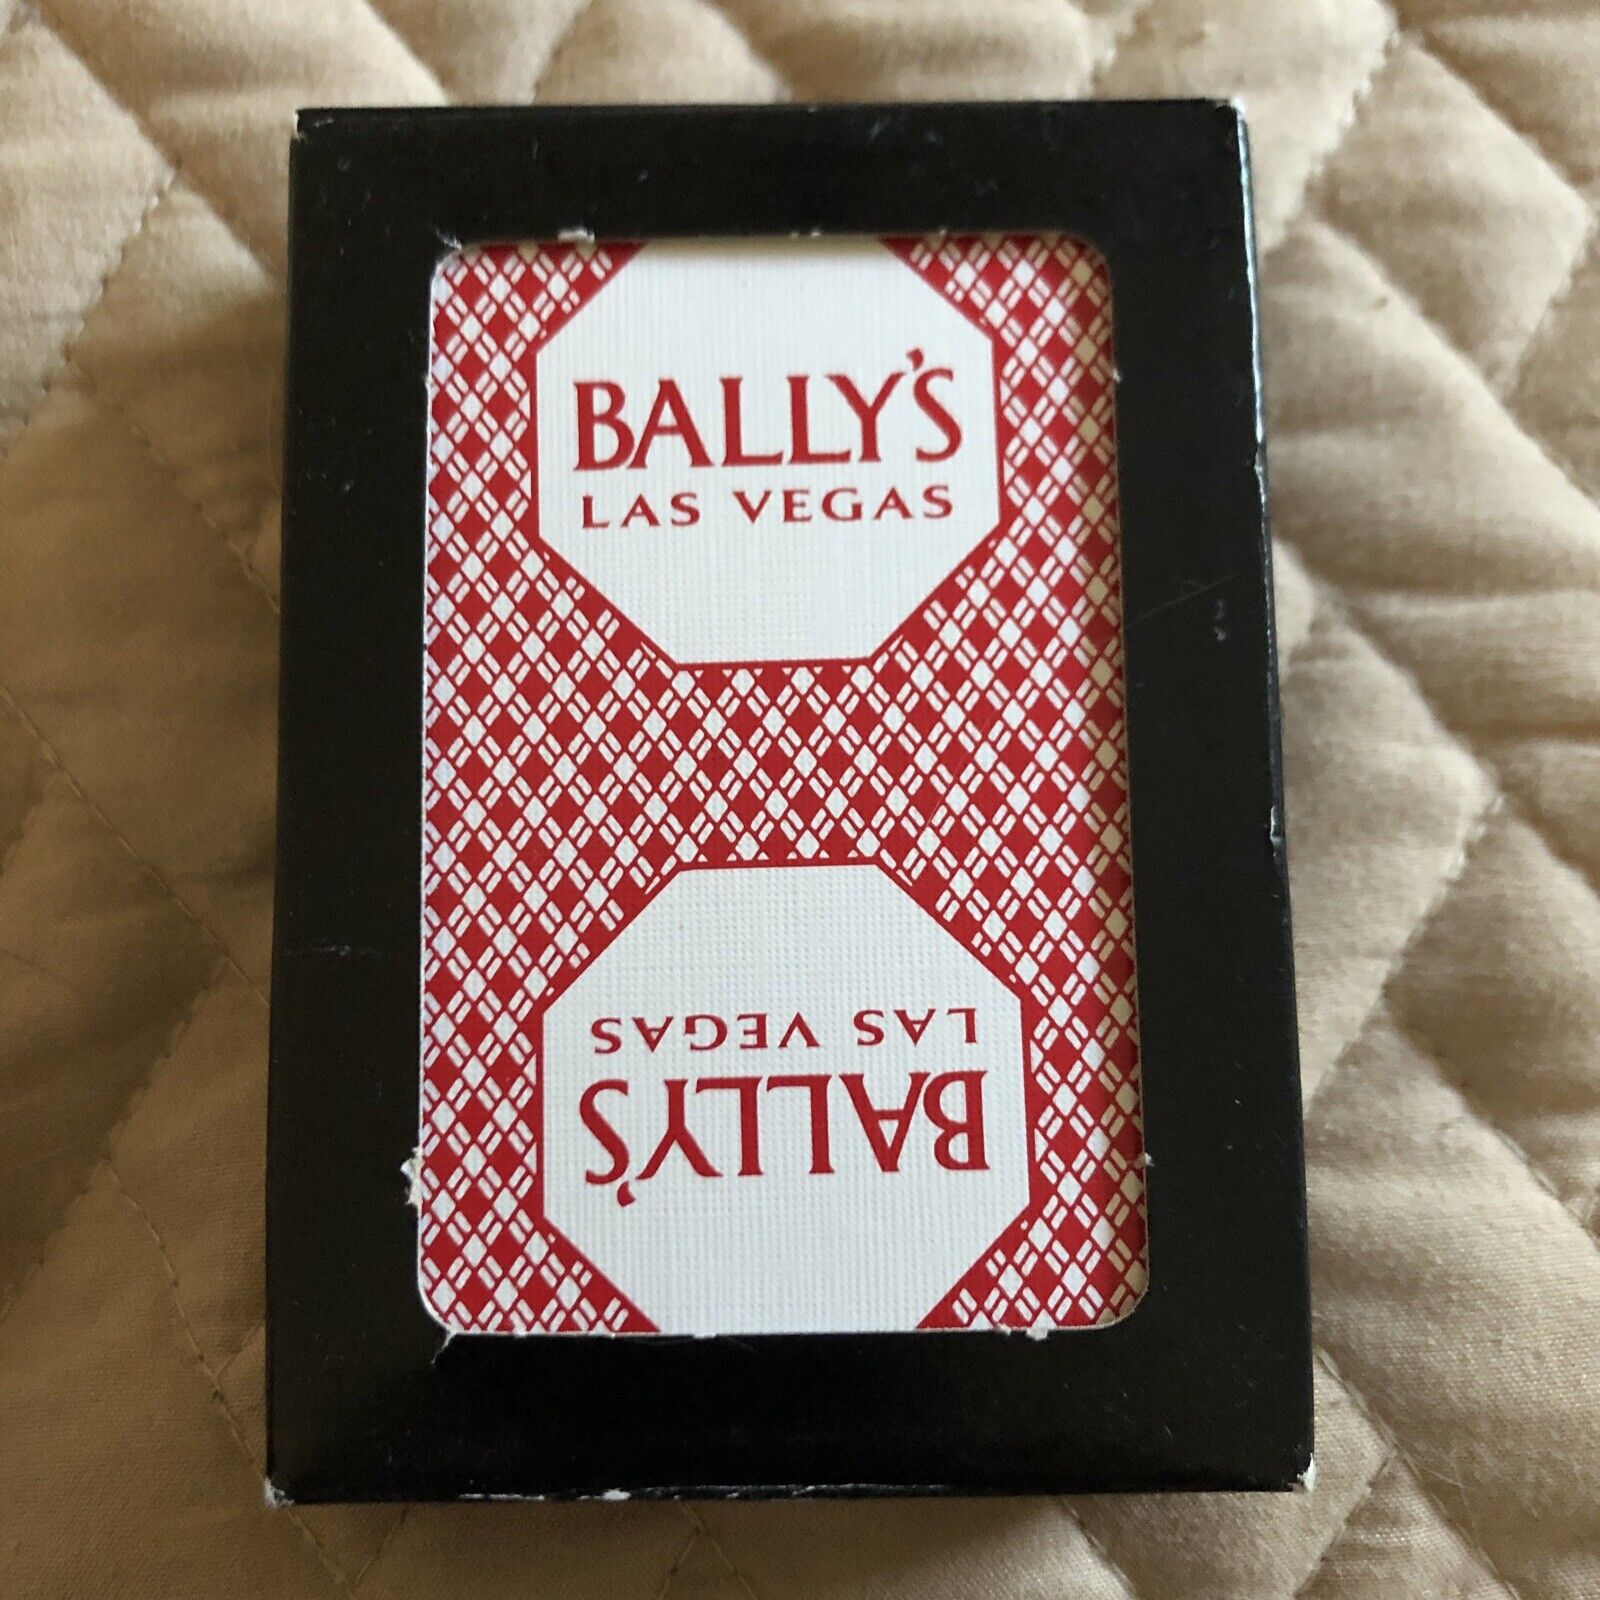 Bally’s Las Vegas NV Authentic Casino Playing Cards (1) Deck Used